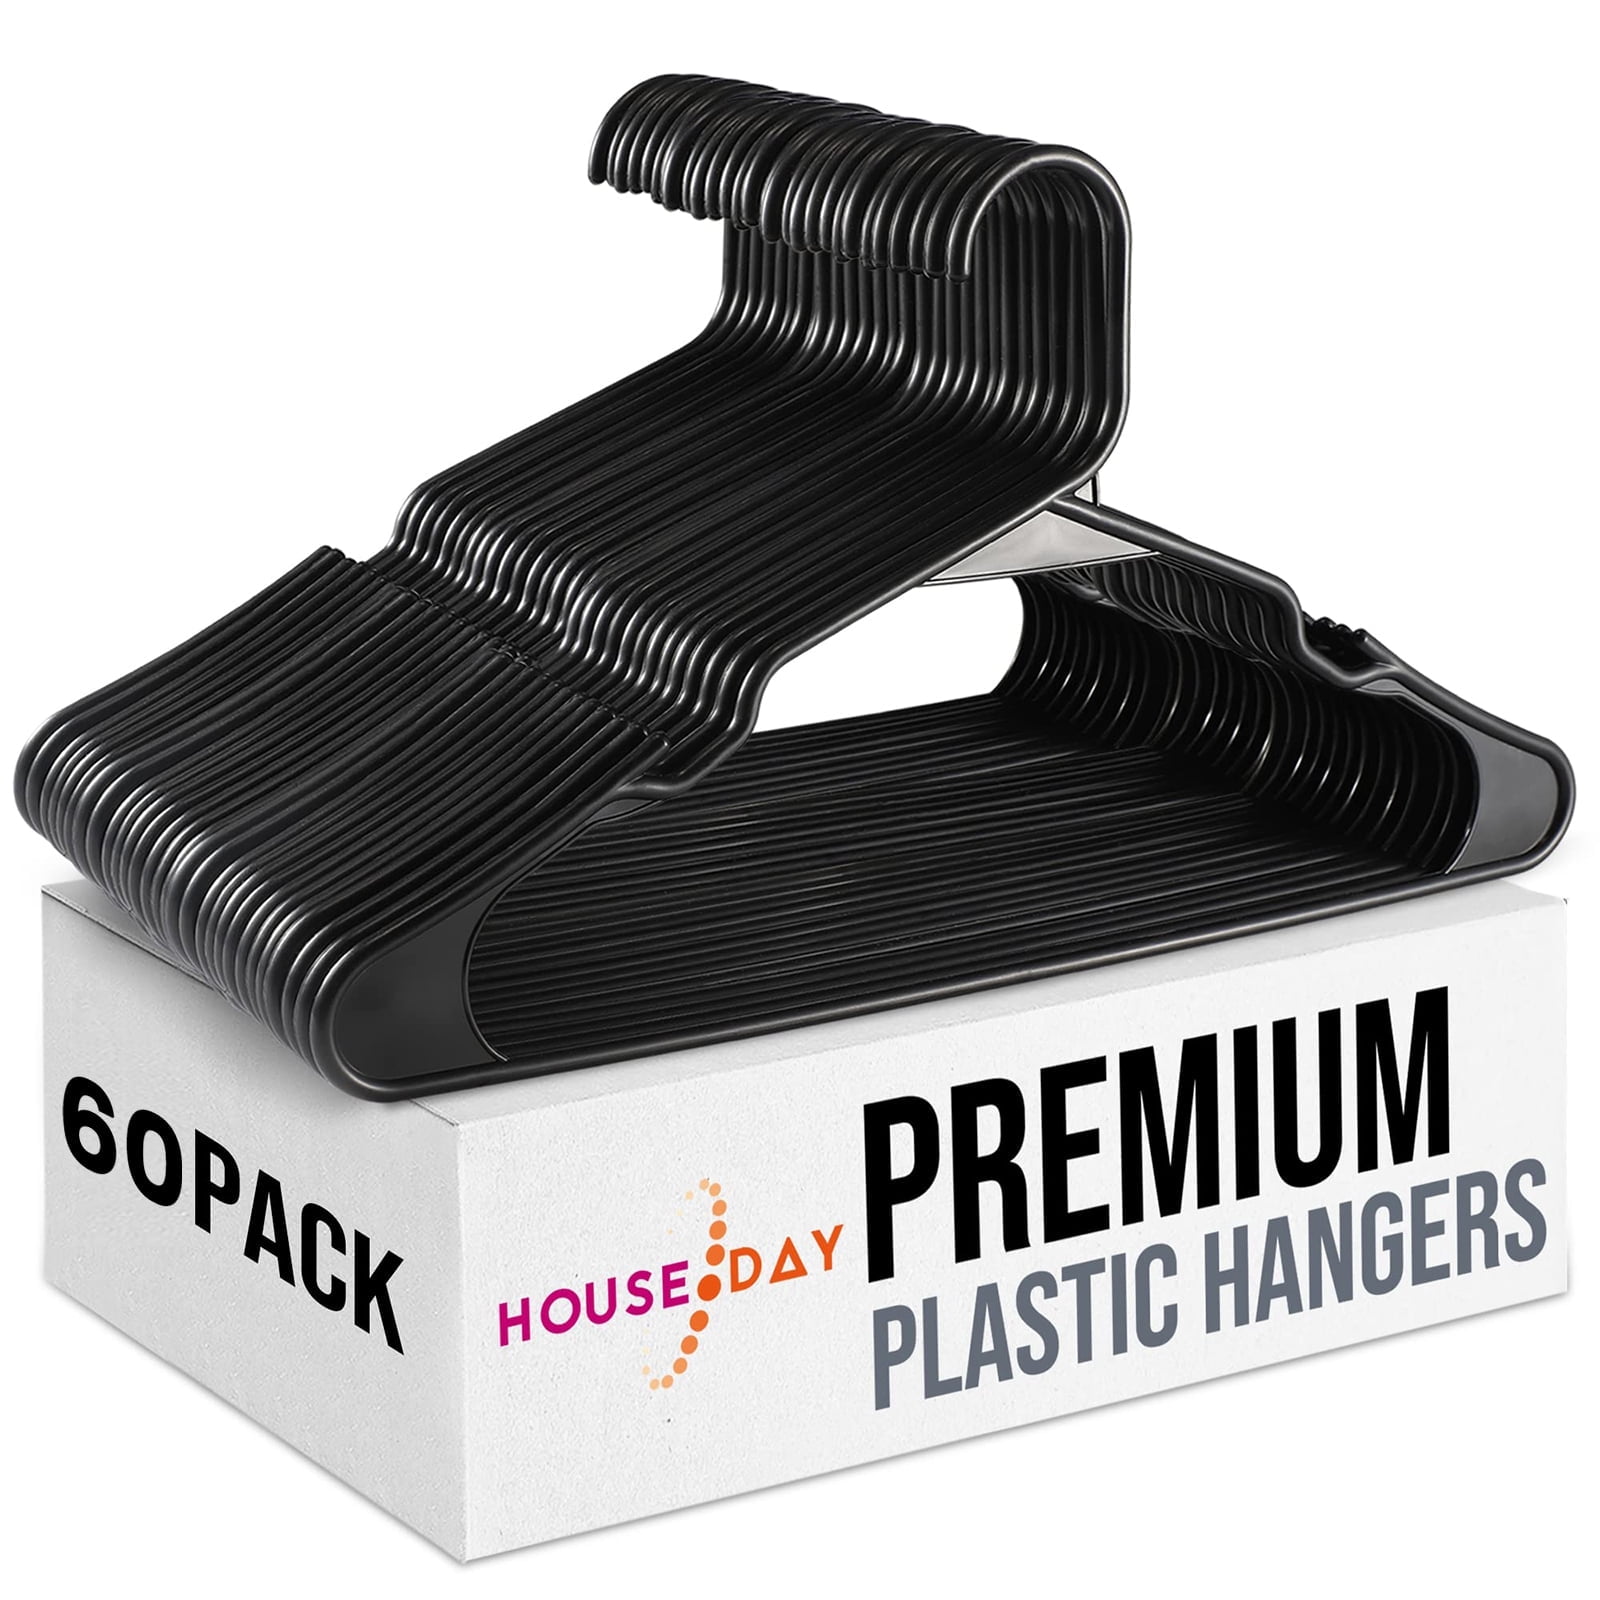 HOUSE DAY Clothes Hangers 60 Pack, Heavy Duty Plastic Hangers, Sturdy and  Durable Dress Hangers Shirt Hangers, Adult Hangers with Hooks, Plastic Coat  Hangers for Closet, Navy Blue Hangers Slim Hanger 